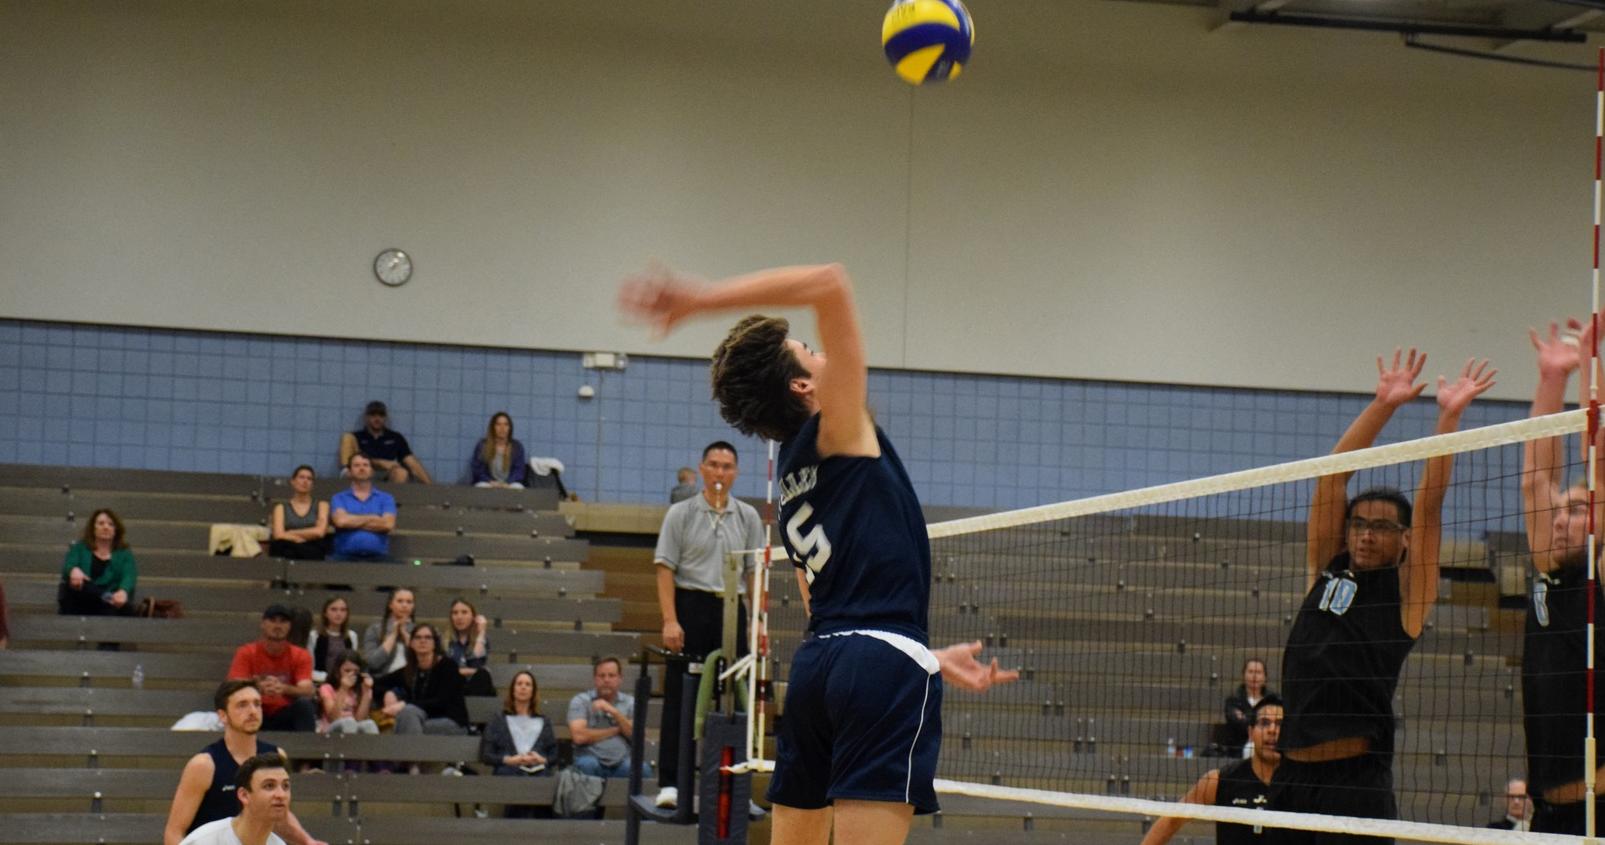 Men's volleyball team starts slow, finishes strong in road win